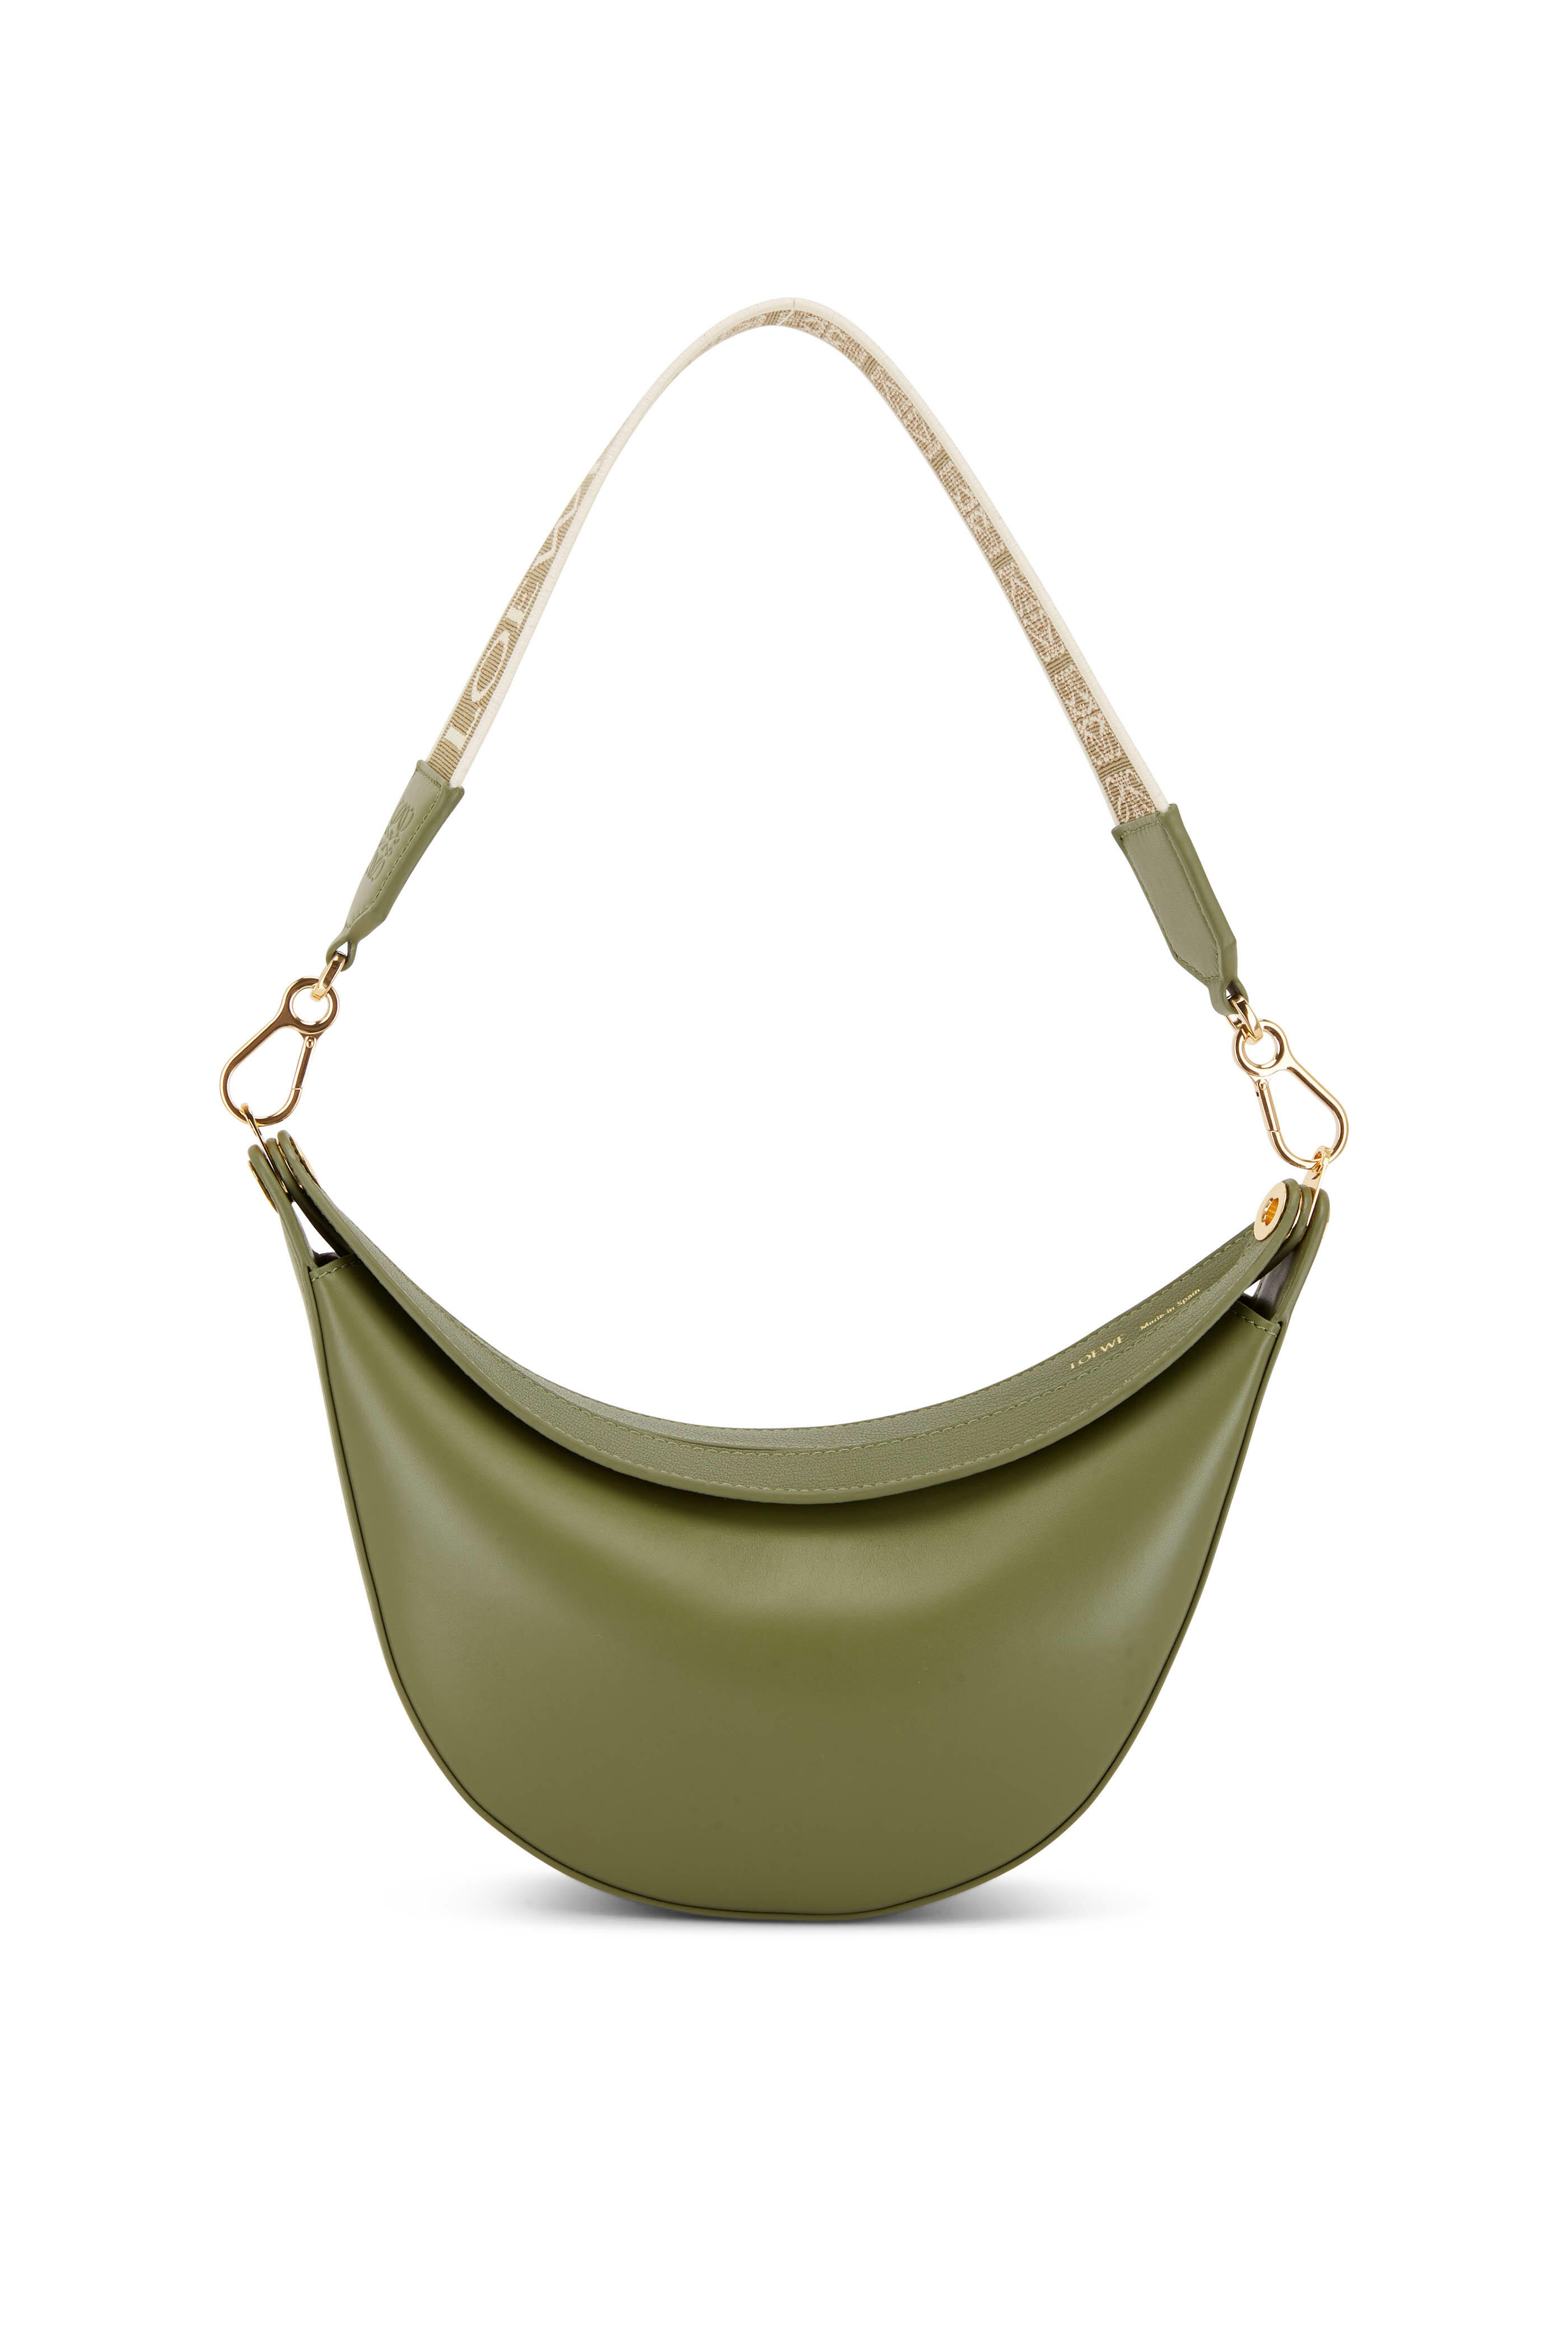 Loewe - Luna Avocado Leather Small Shoulder | Mitchell Stores